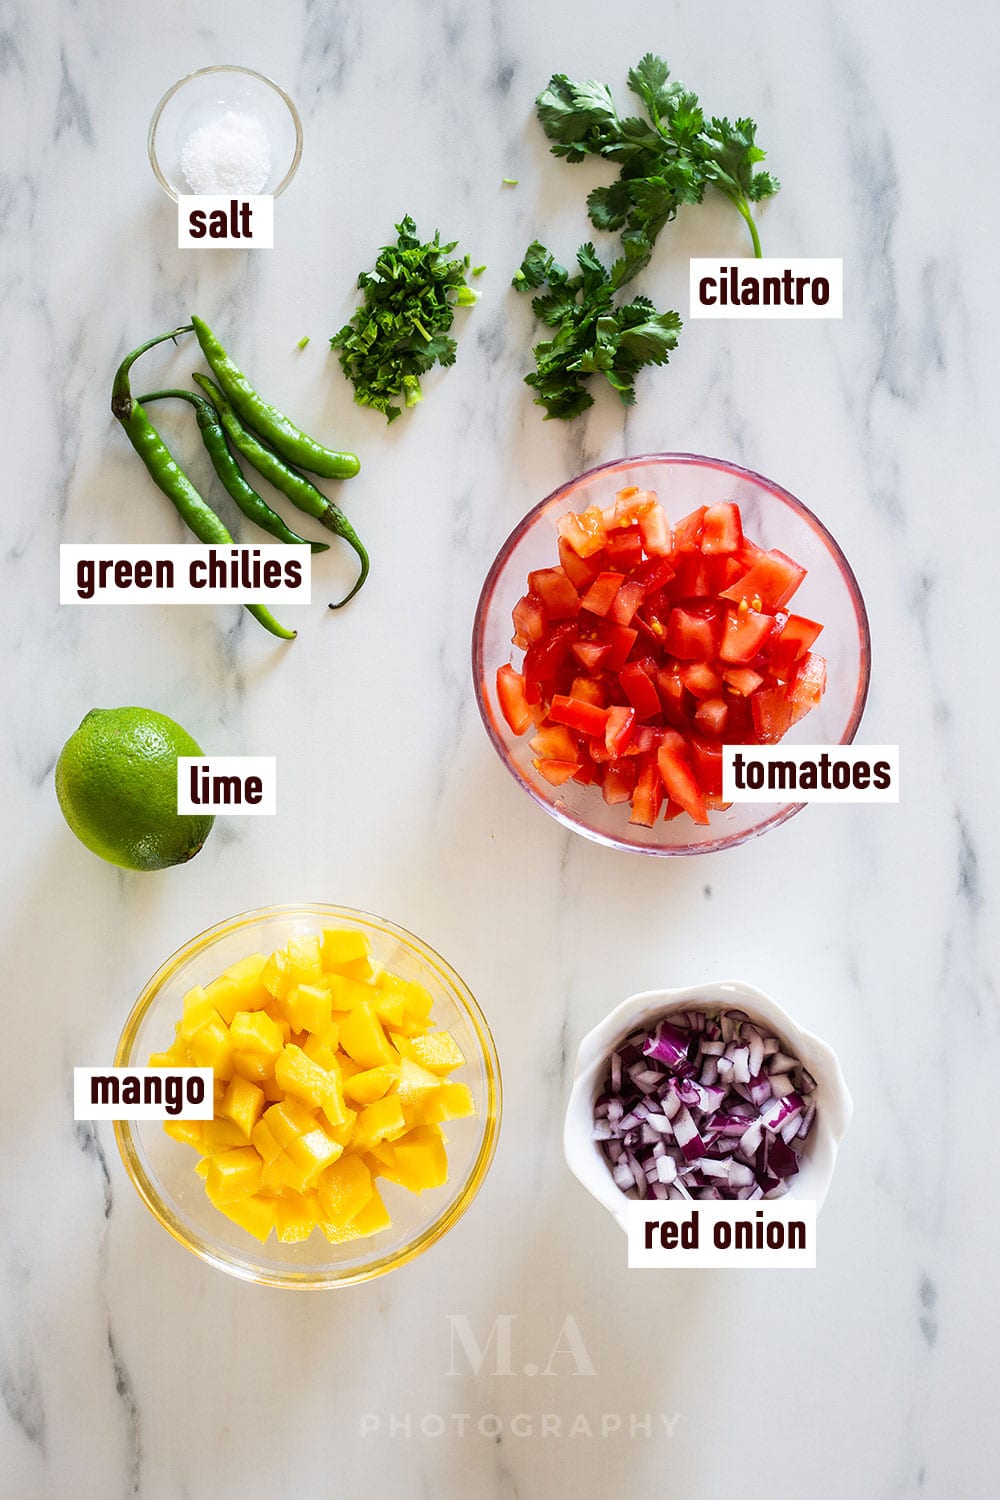 Ingredients for mango pico de gallo labeled and displayed on a marble surface.